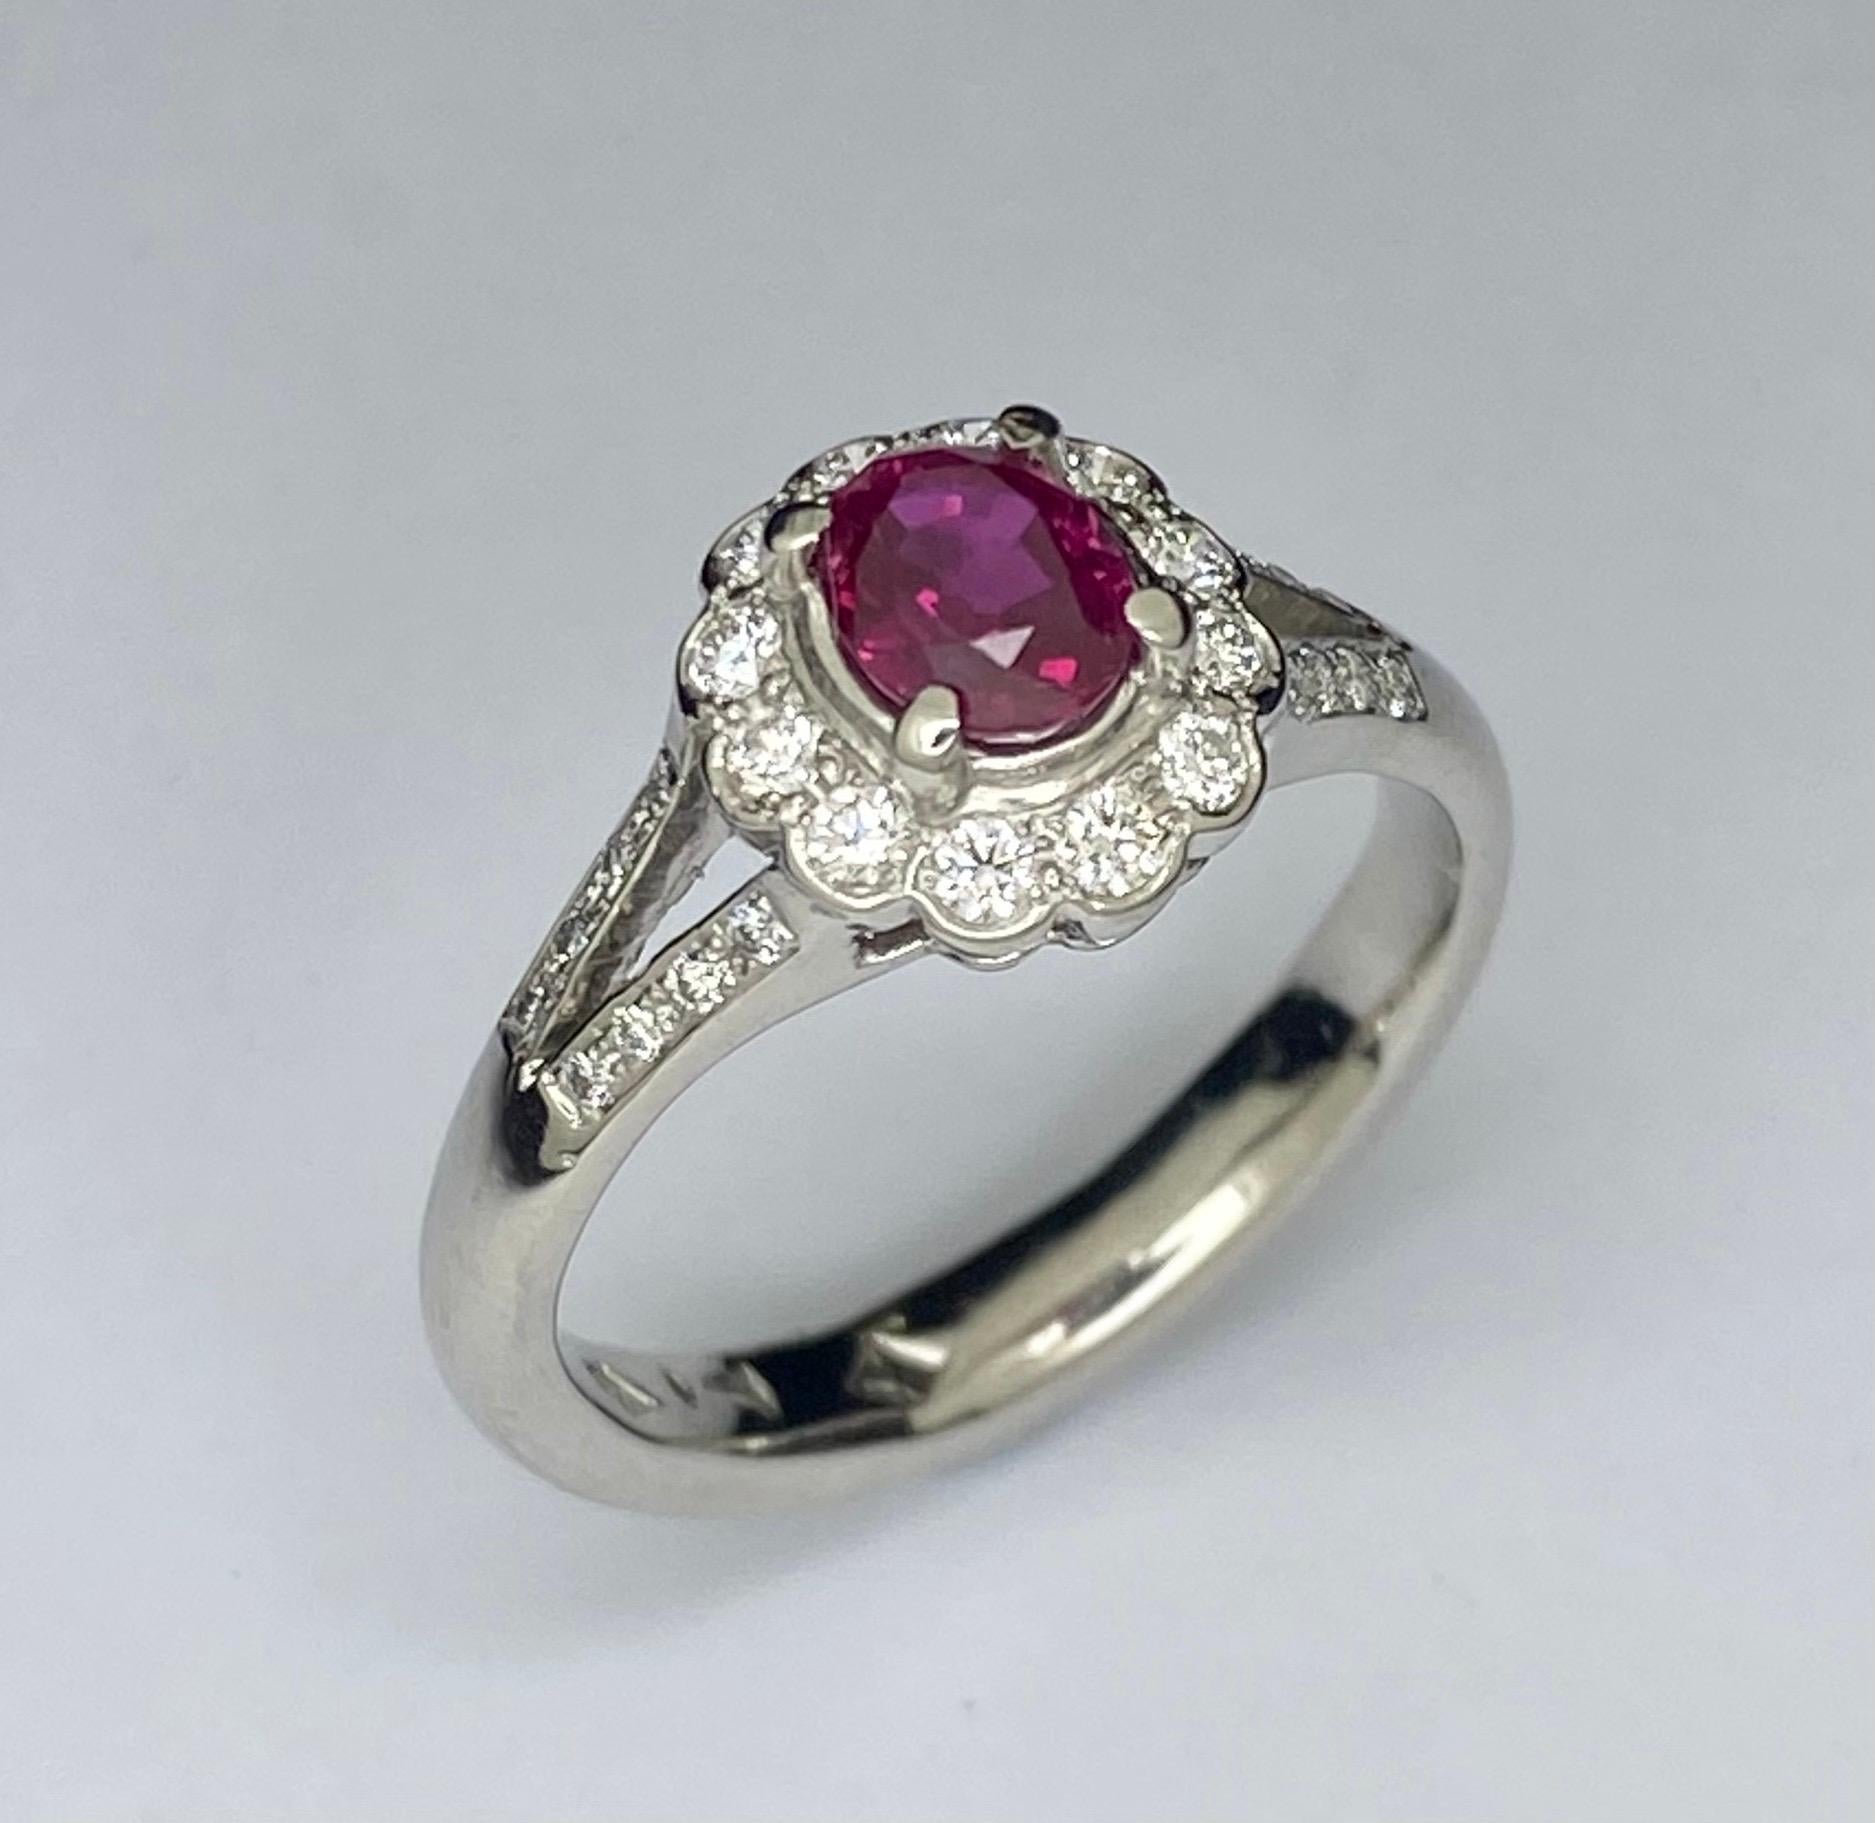 Platinum Vivid Ruby Diamond Cluster Ring

Elegant vintage style contains an oval vivid red ruby secured in a four claw setting. Surrounding the ruby is 12 round brilliant cut diamonds in bezel setting forming a scallop cluster head. Split band to